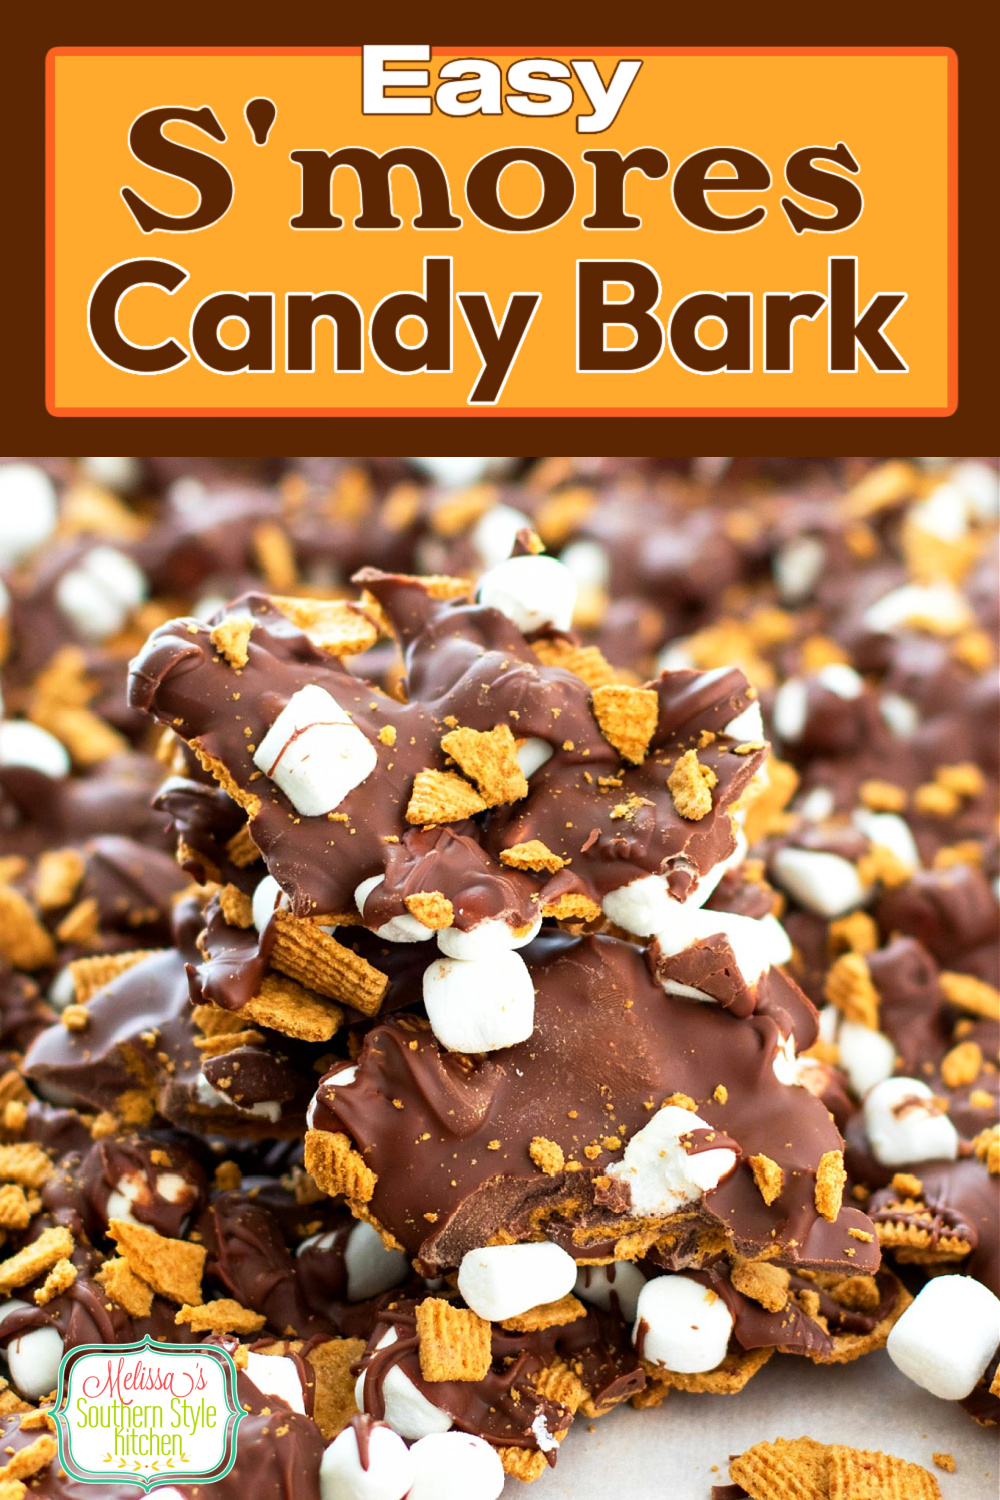 No campfire is needed to make this Easy S'mores Candy Bark #smores #candy #candybark #smorescandy #chocolate #easydesserts #desserts #deessertfoodrecipes #holidayrecipes #marshmallows #southernfood #southernrecipes via @melissasssk